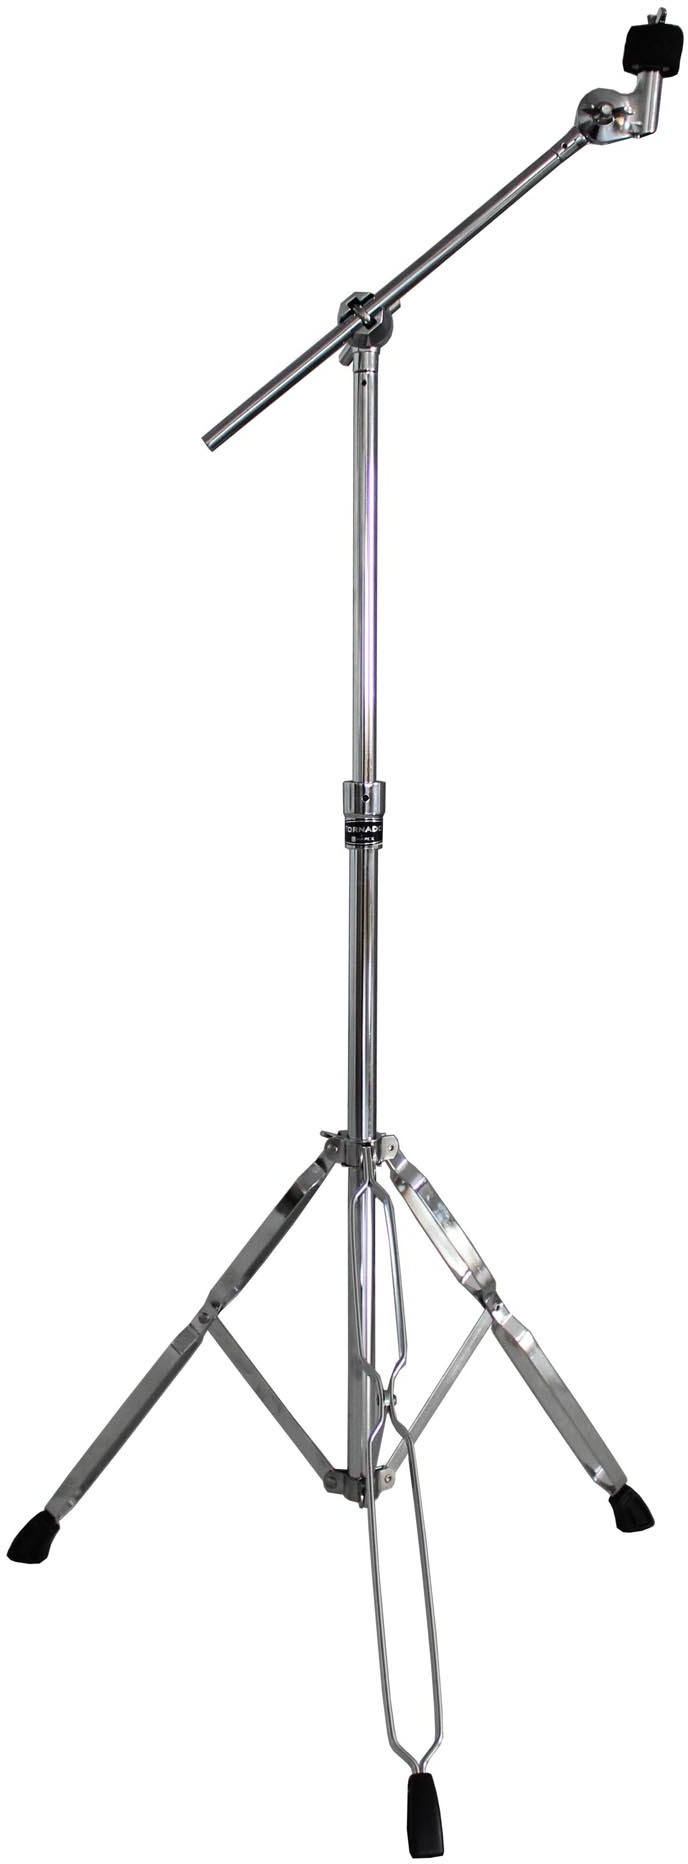 Mapex Tornado Cymbal Stand - Cymbal stand - Main picture